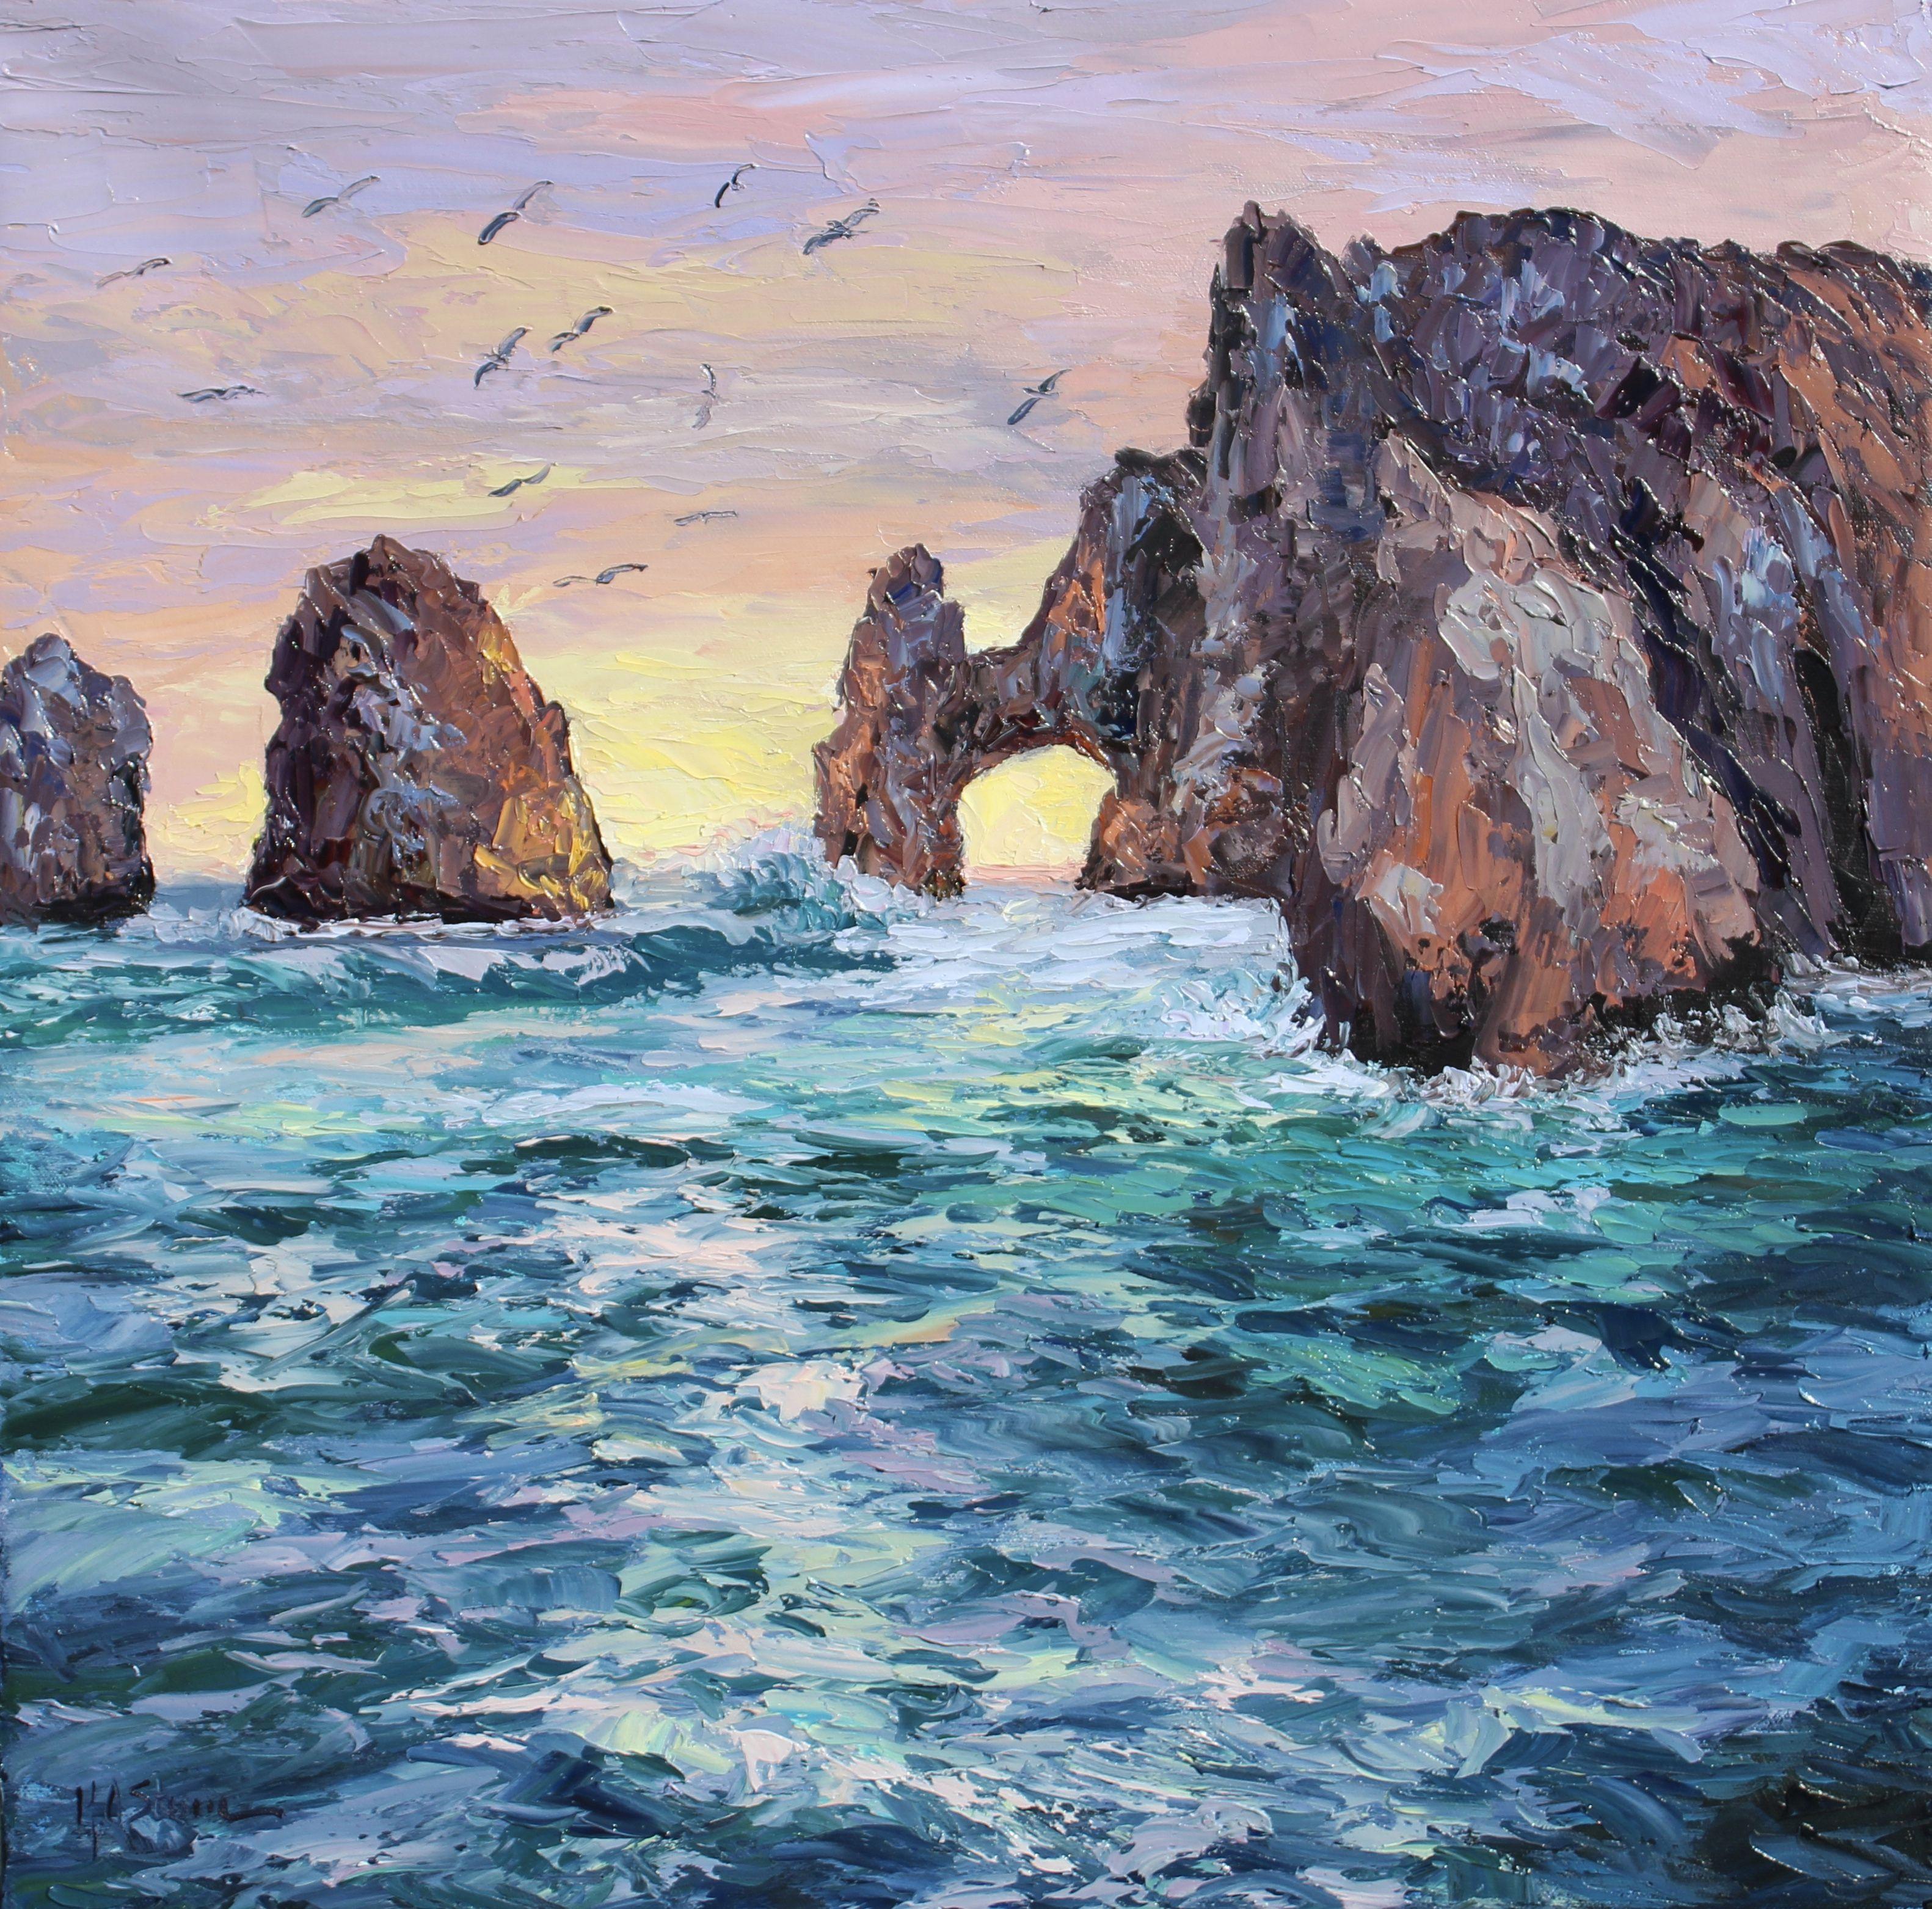 An original seascape textured oil painting of Cabo San Lucas. This painting features the view of Arch Rocks and pelicans soaring above the ocean at sunset. The colors and textures in this artwork are lovely, you feel as if you are sitting in a boat